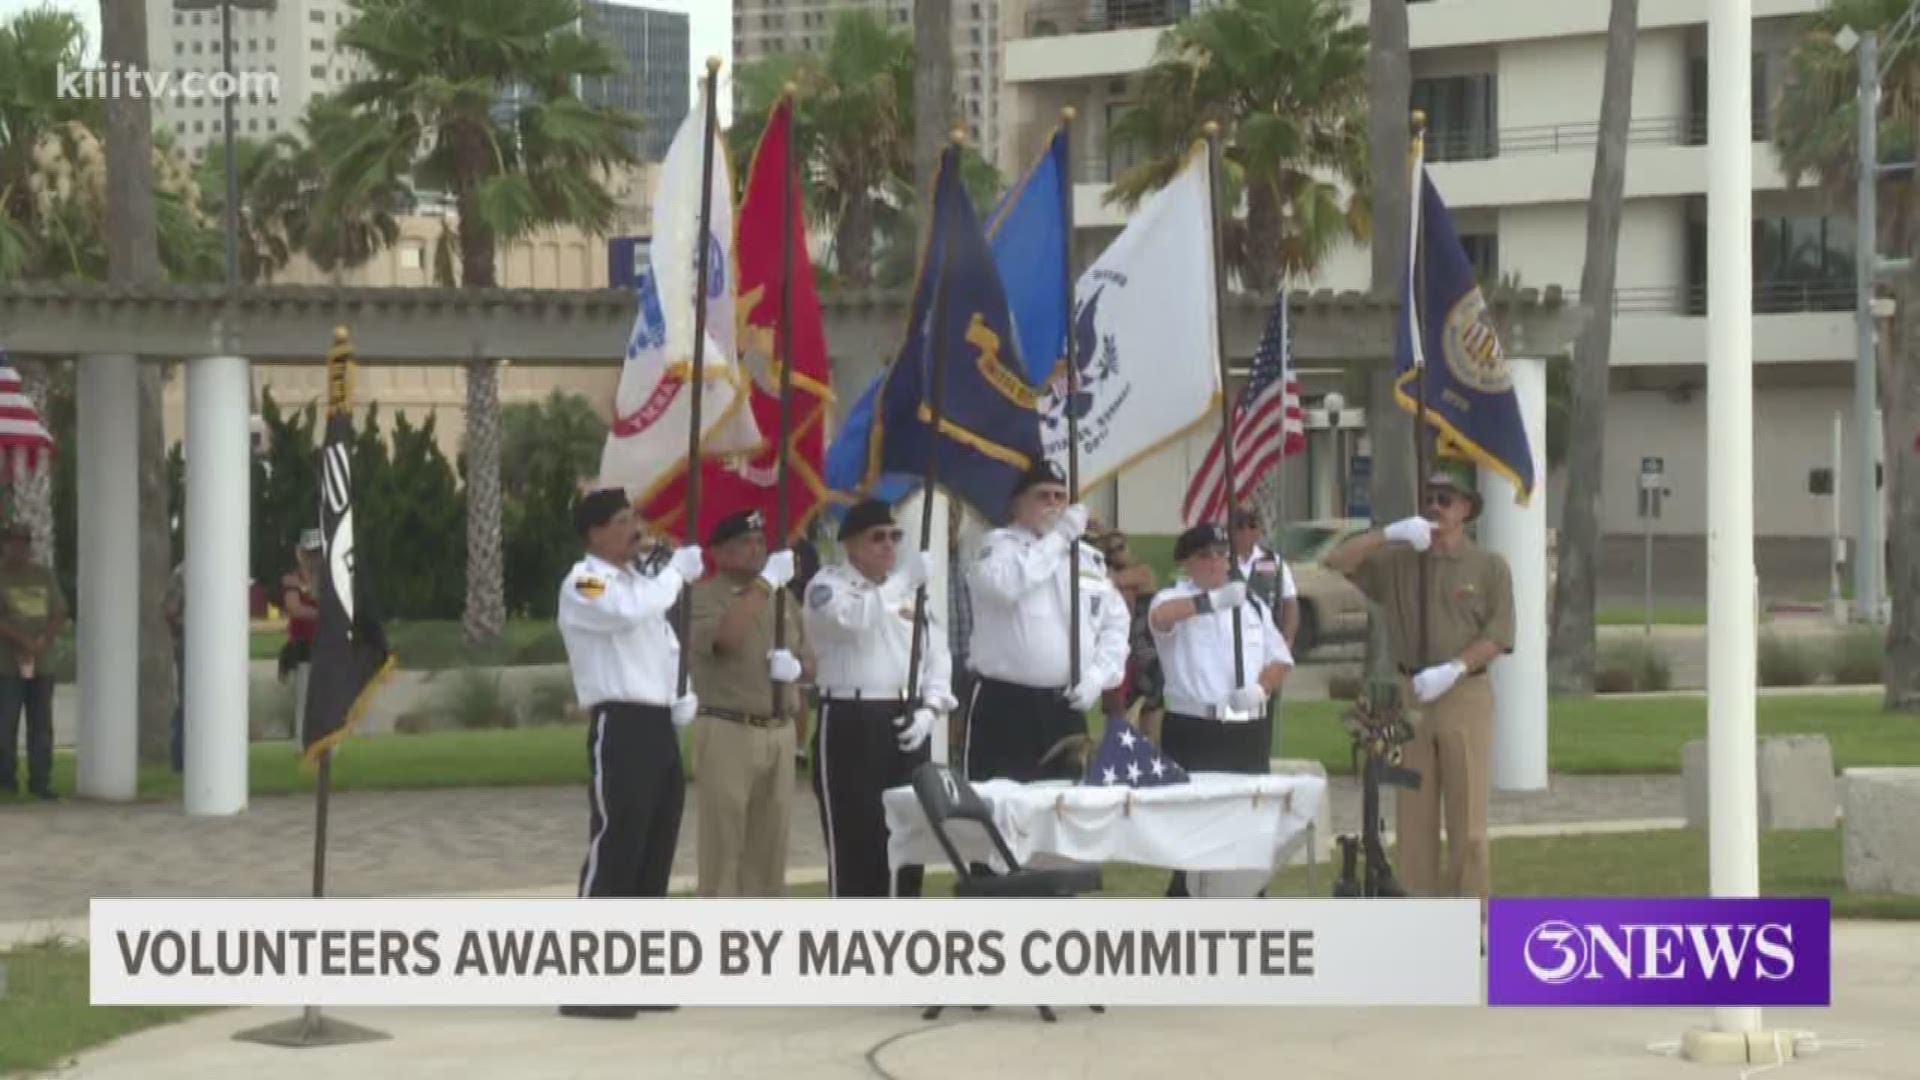 The Mayor's committee awarded each of the five volunteers with a plaque during the Memorial Day ceremony at Sherrill Park.